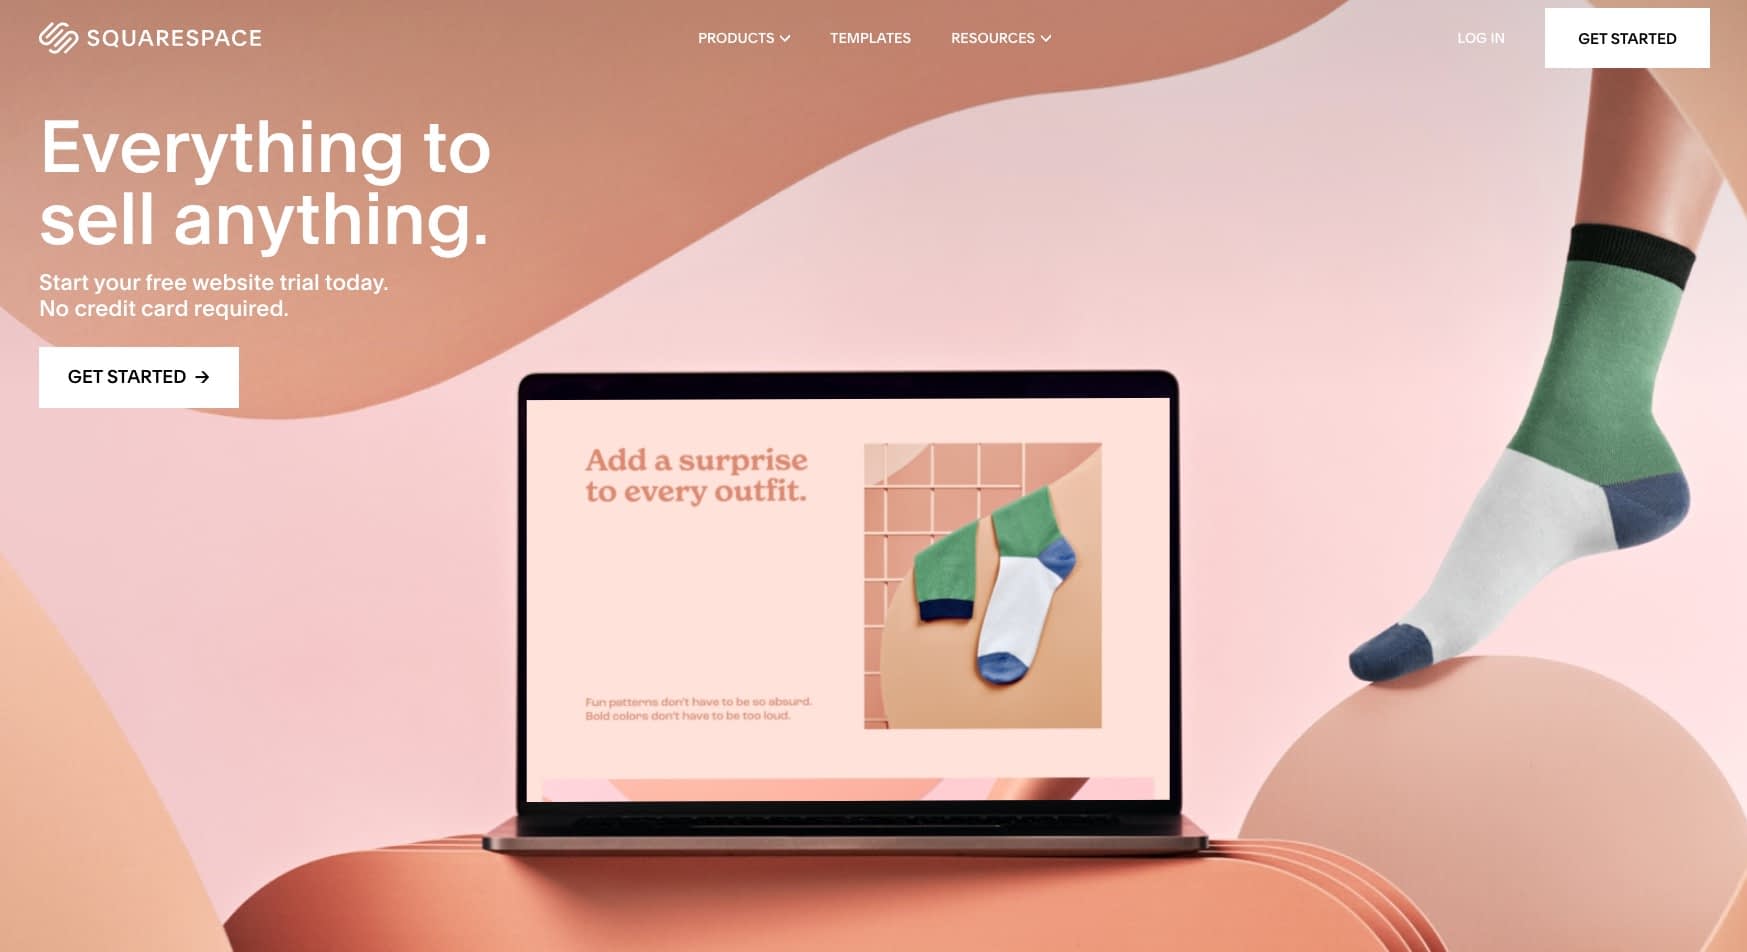 The home page for Squarespace.